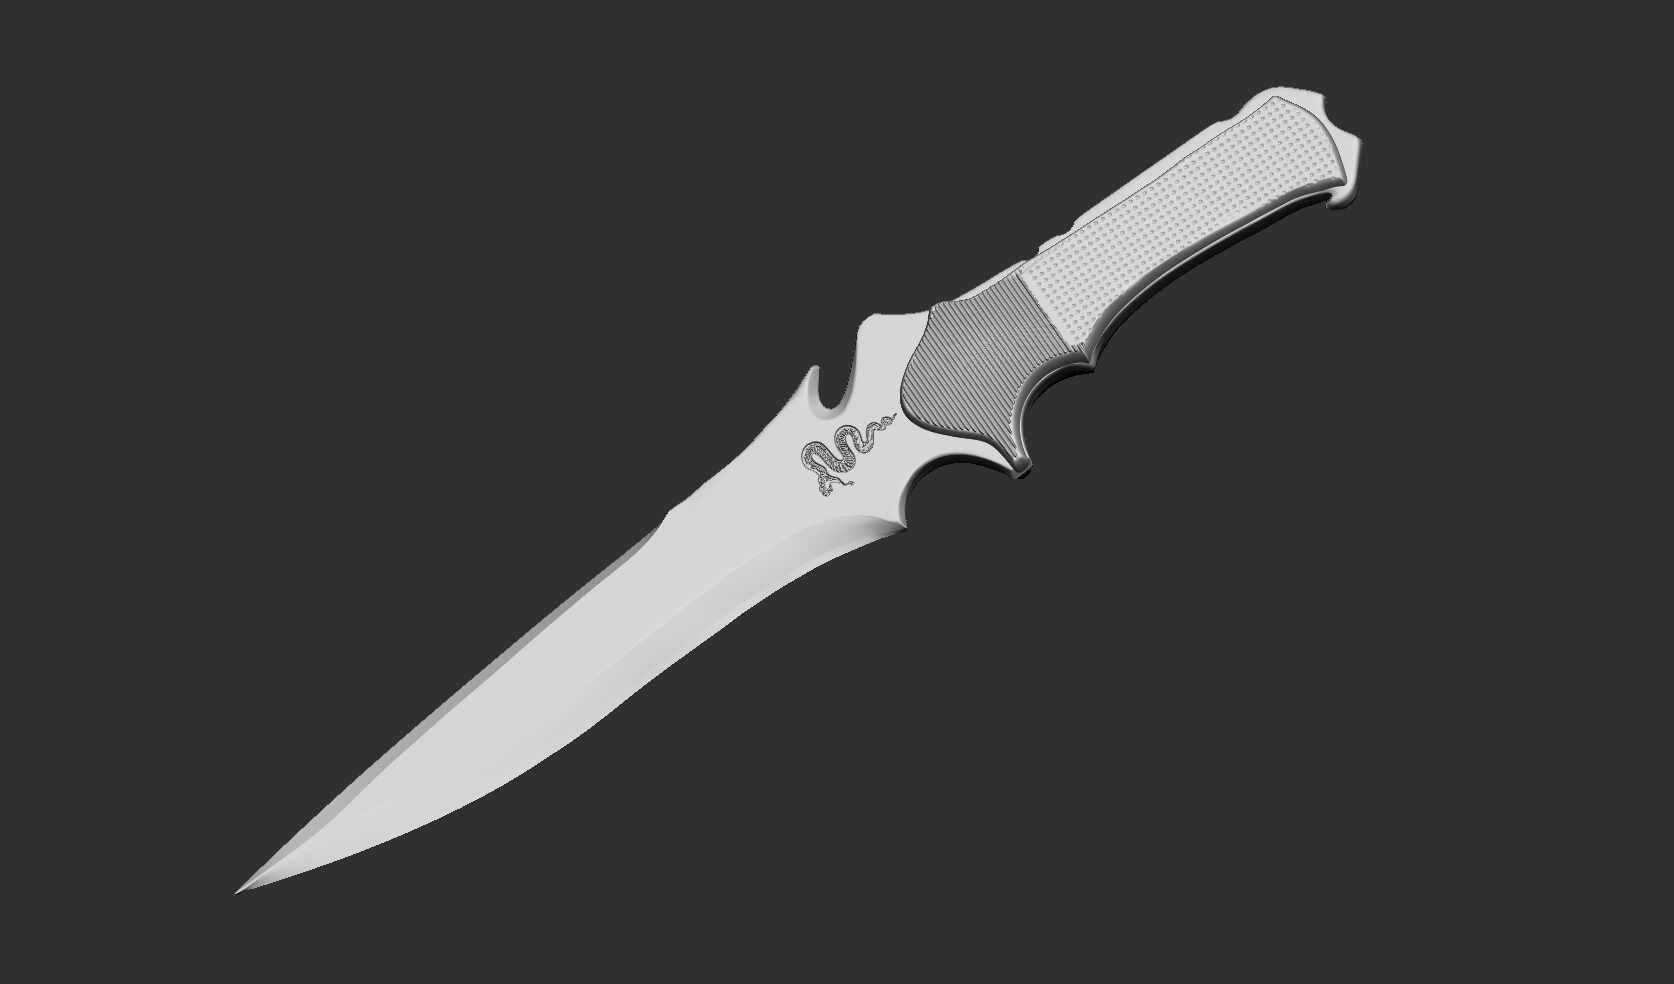 Krausers Knife from RE4 by zero-tx on DeviantArt